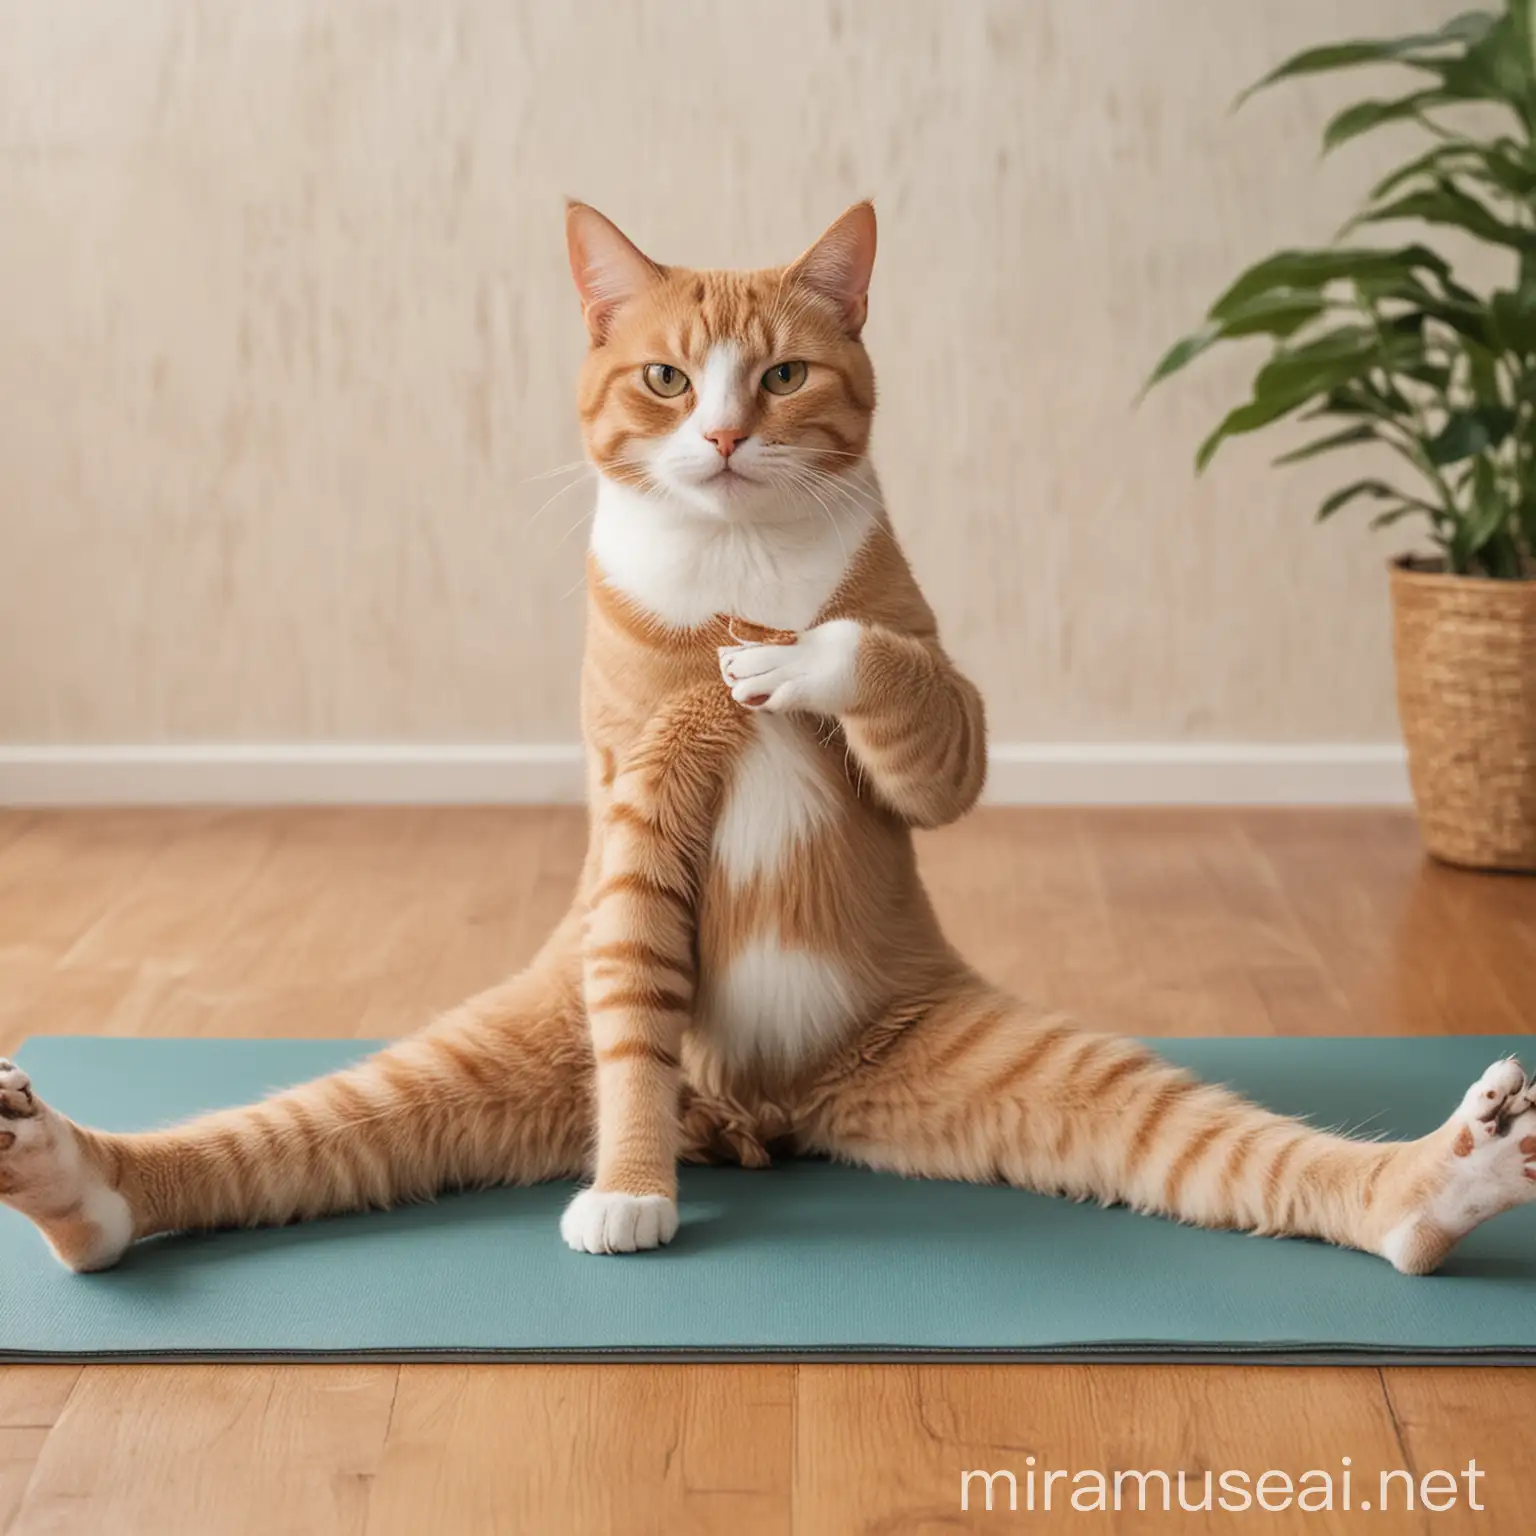 Capture amusing moments of your cat in various yoga poses or joining you during your yoga sessions